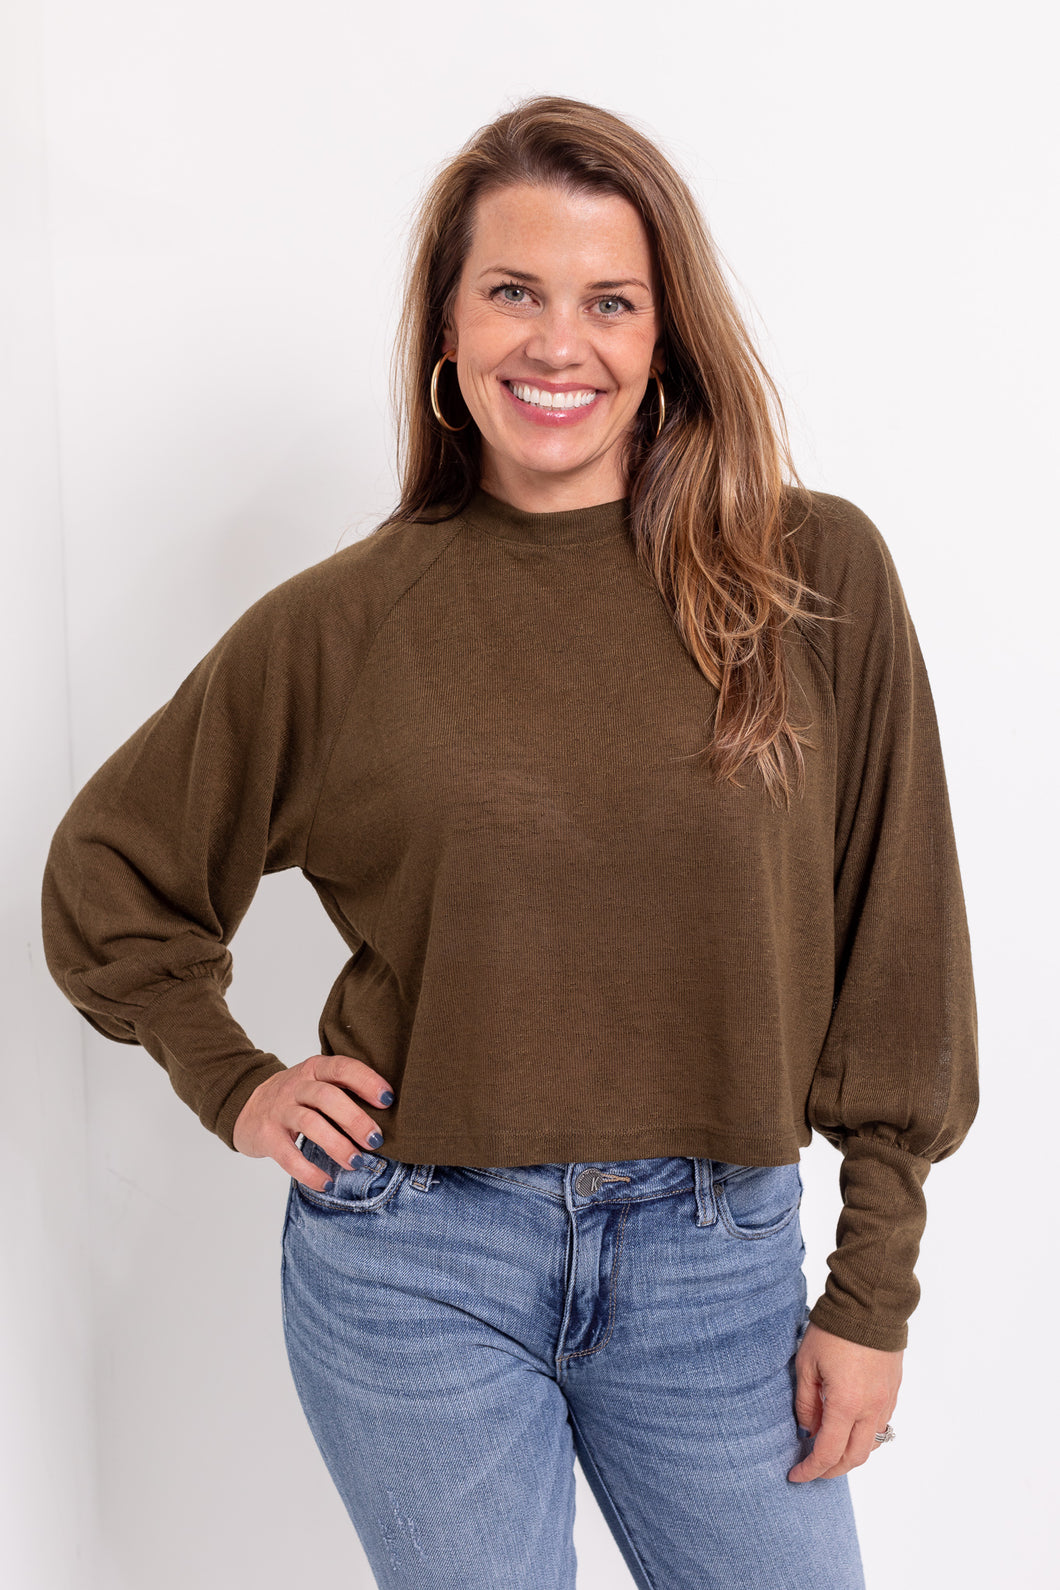 High Hopes Knit Top in Olive